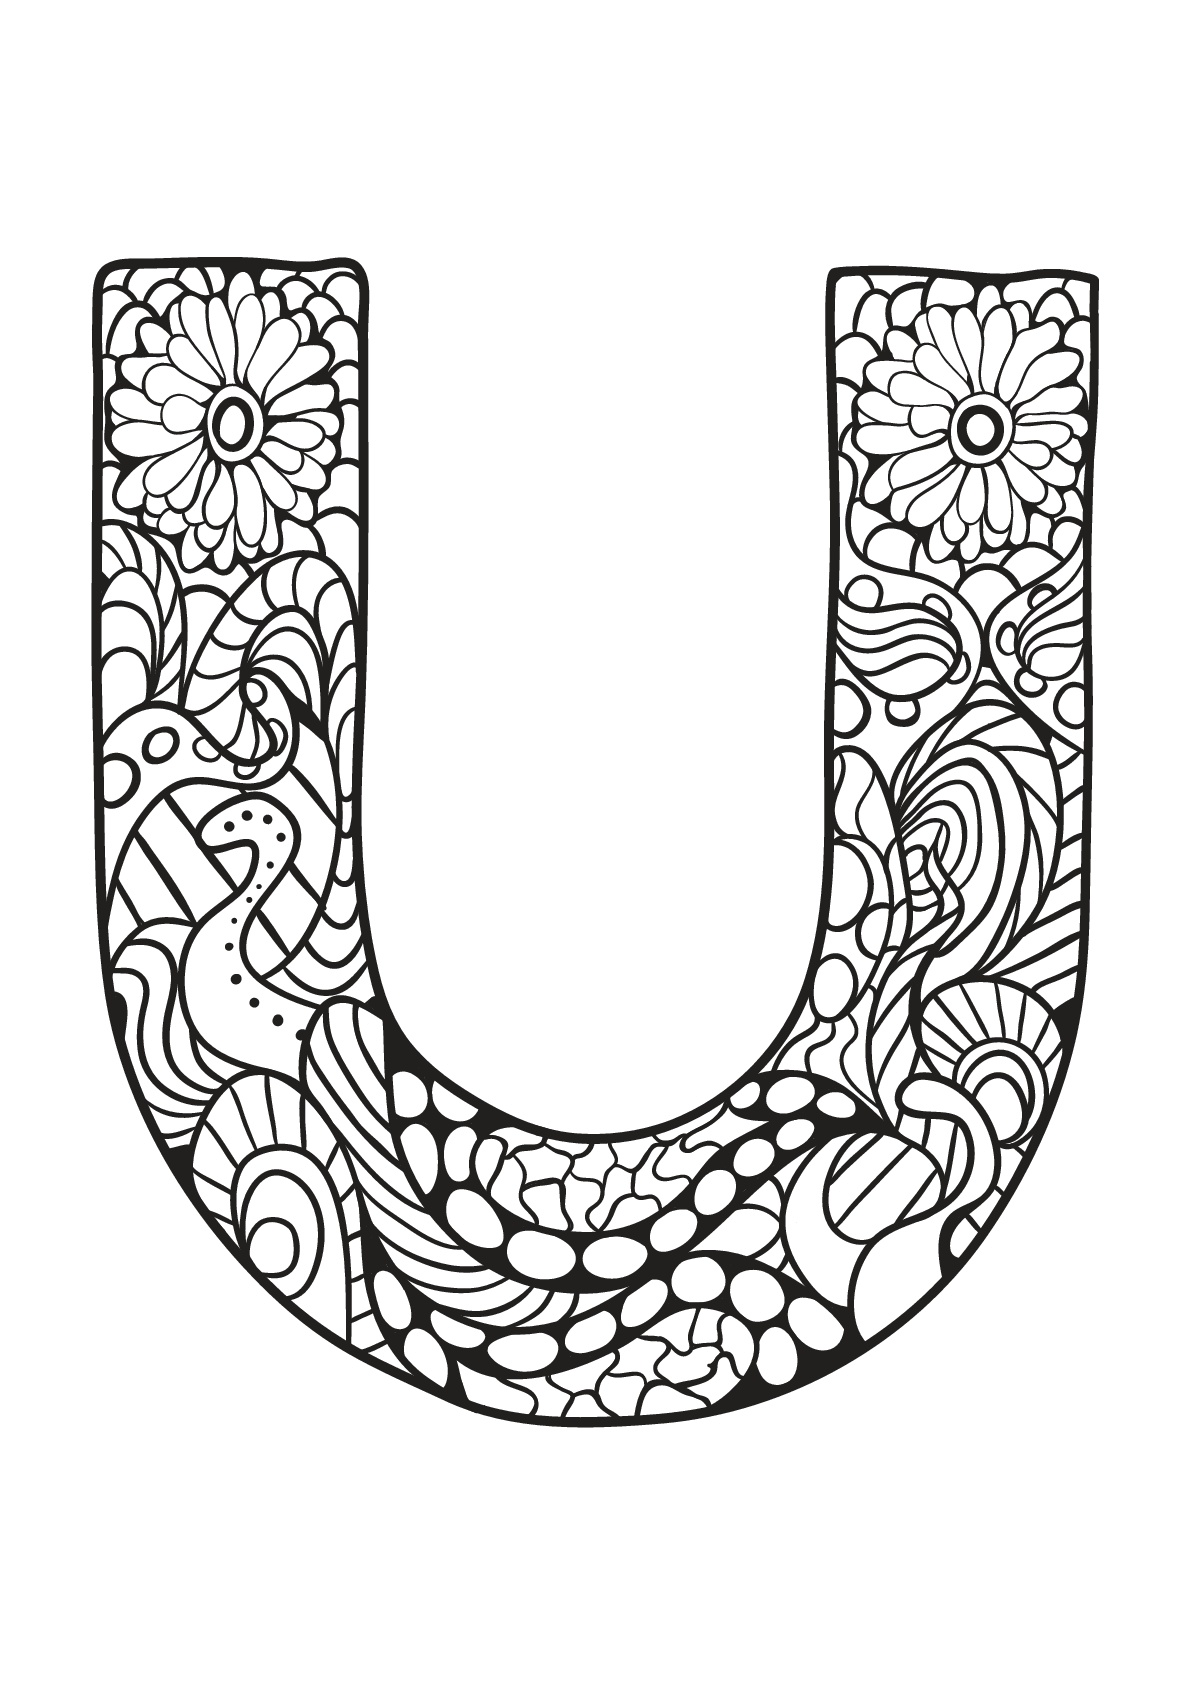 Alphabet to print for free : U - Alphabet Kids Coloring Pages